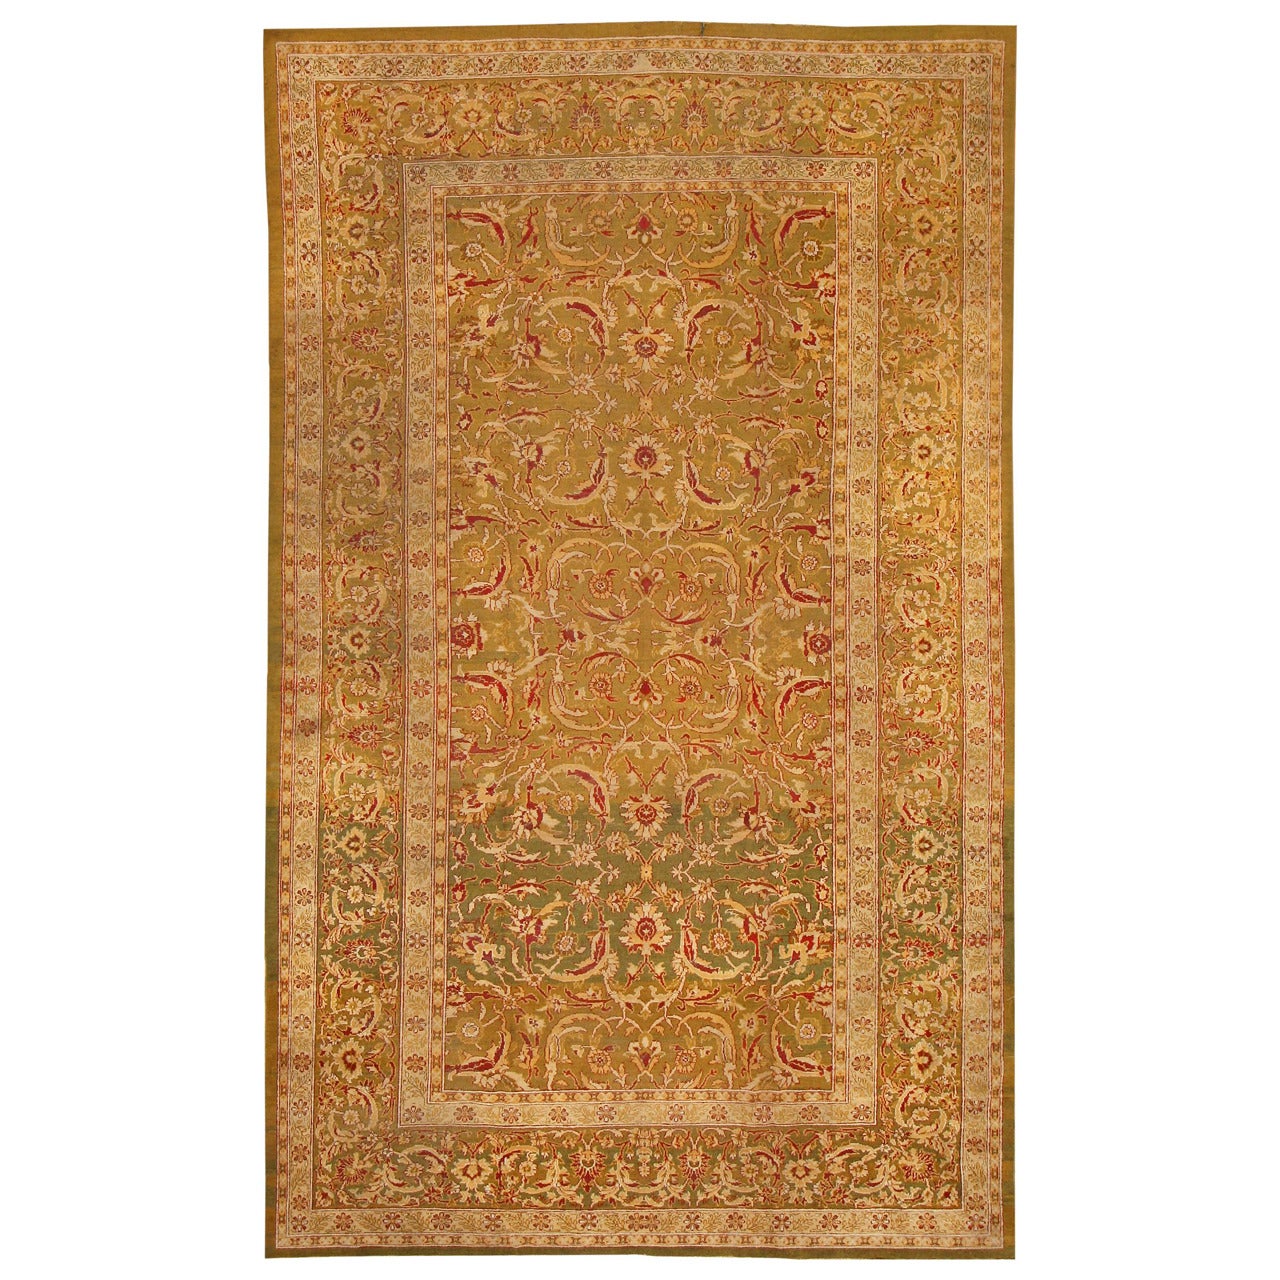 Antique Amritsar Rug from North India